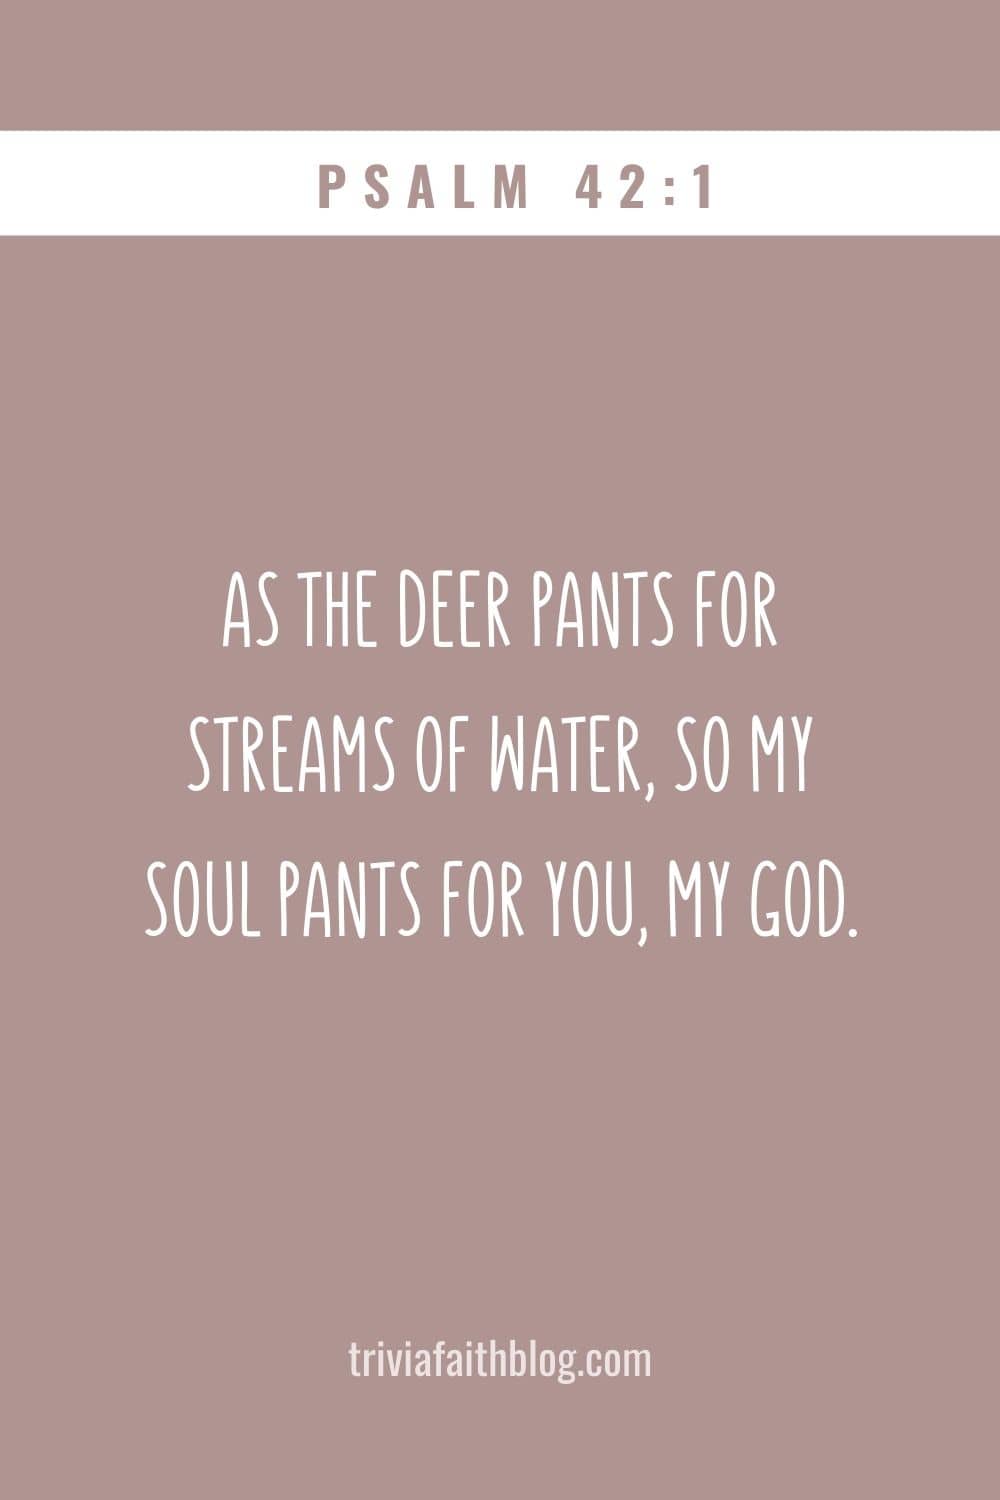 As the deer pants for water, so my soul pants for you